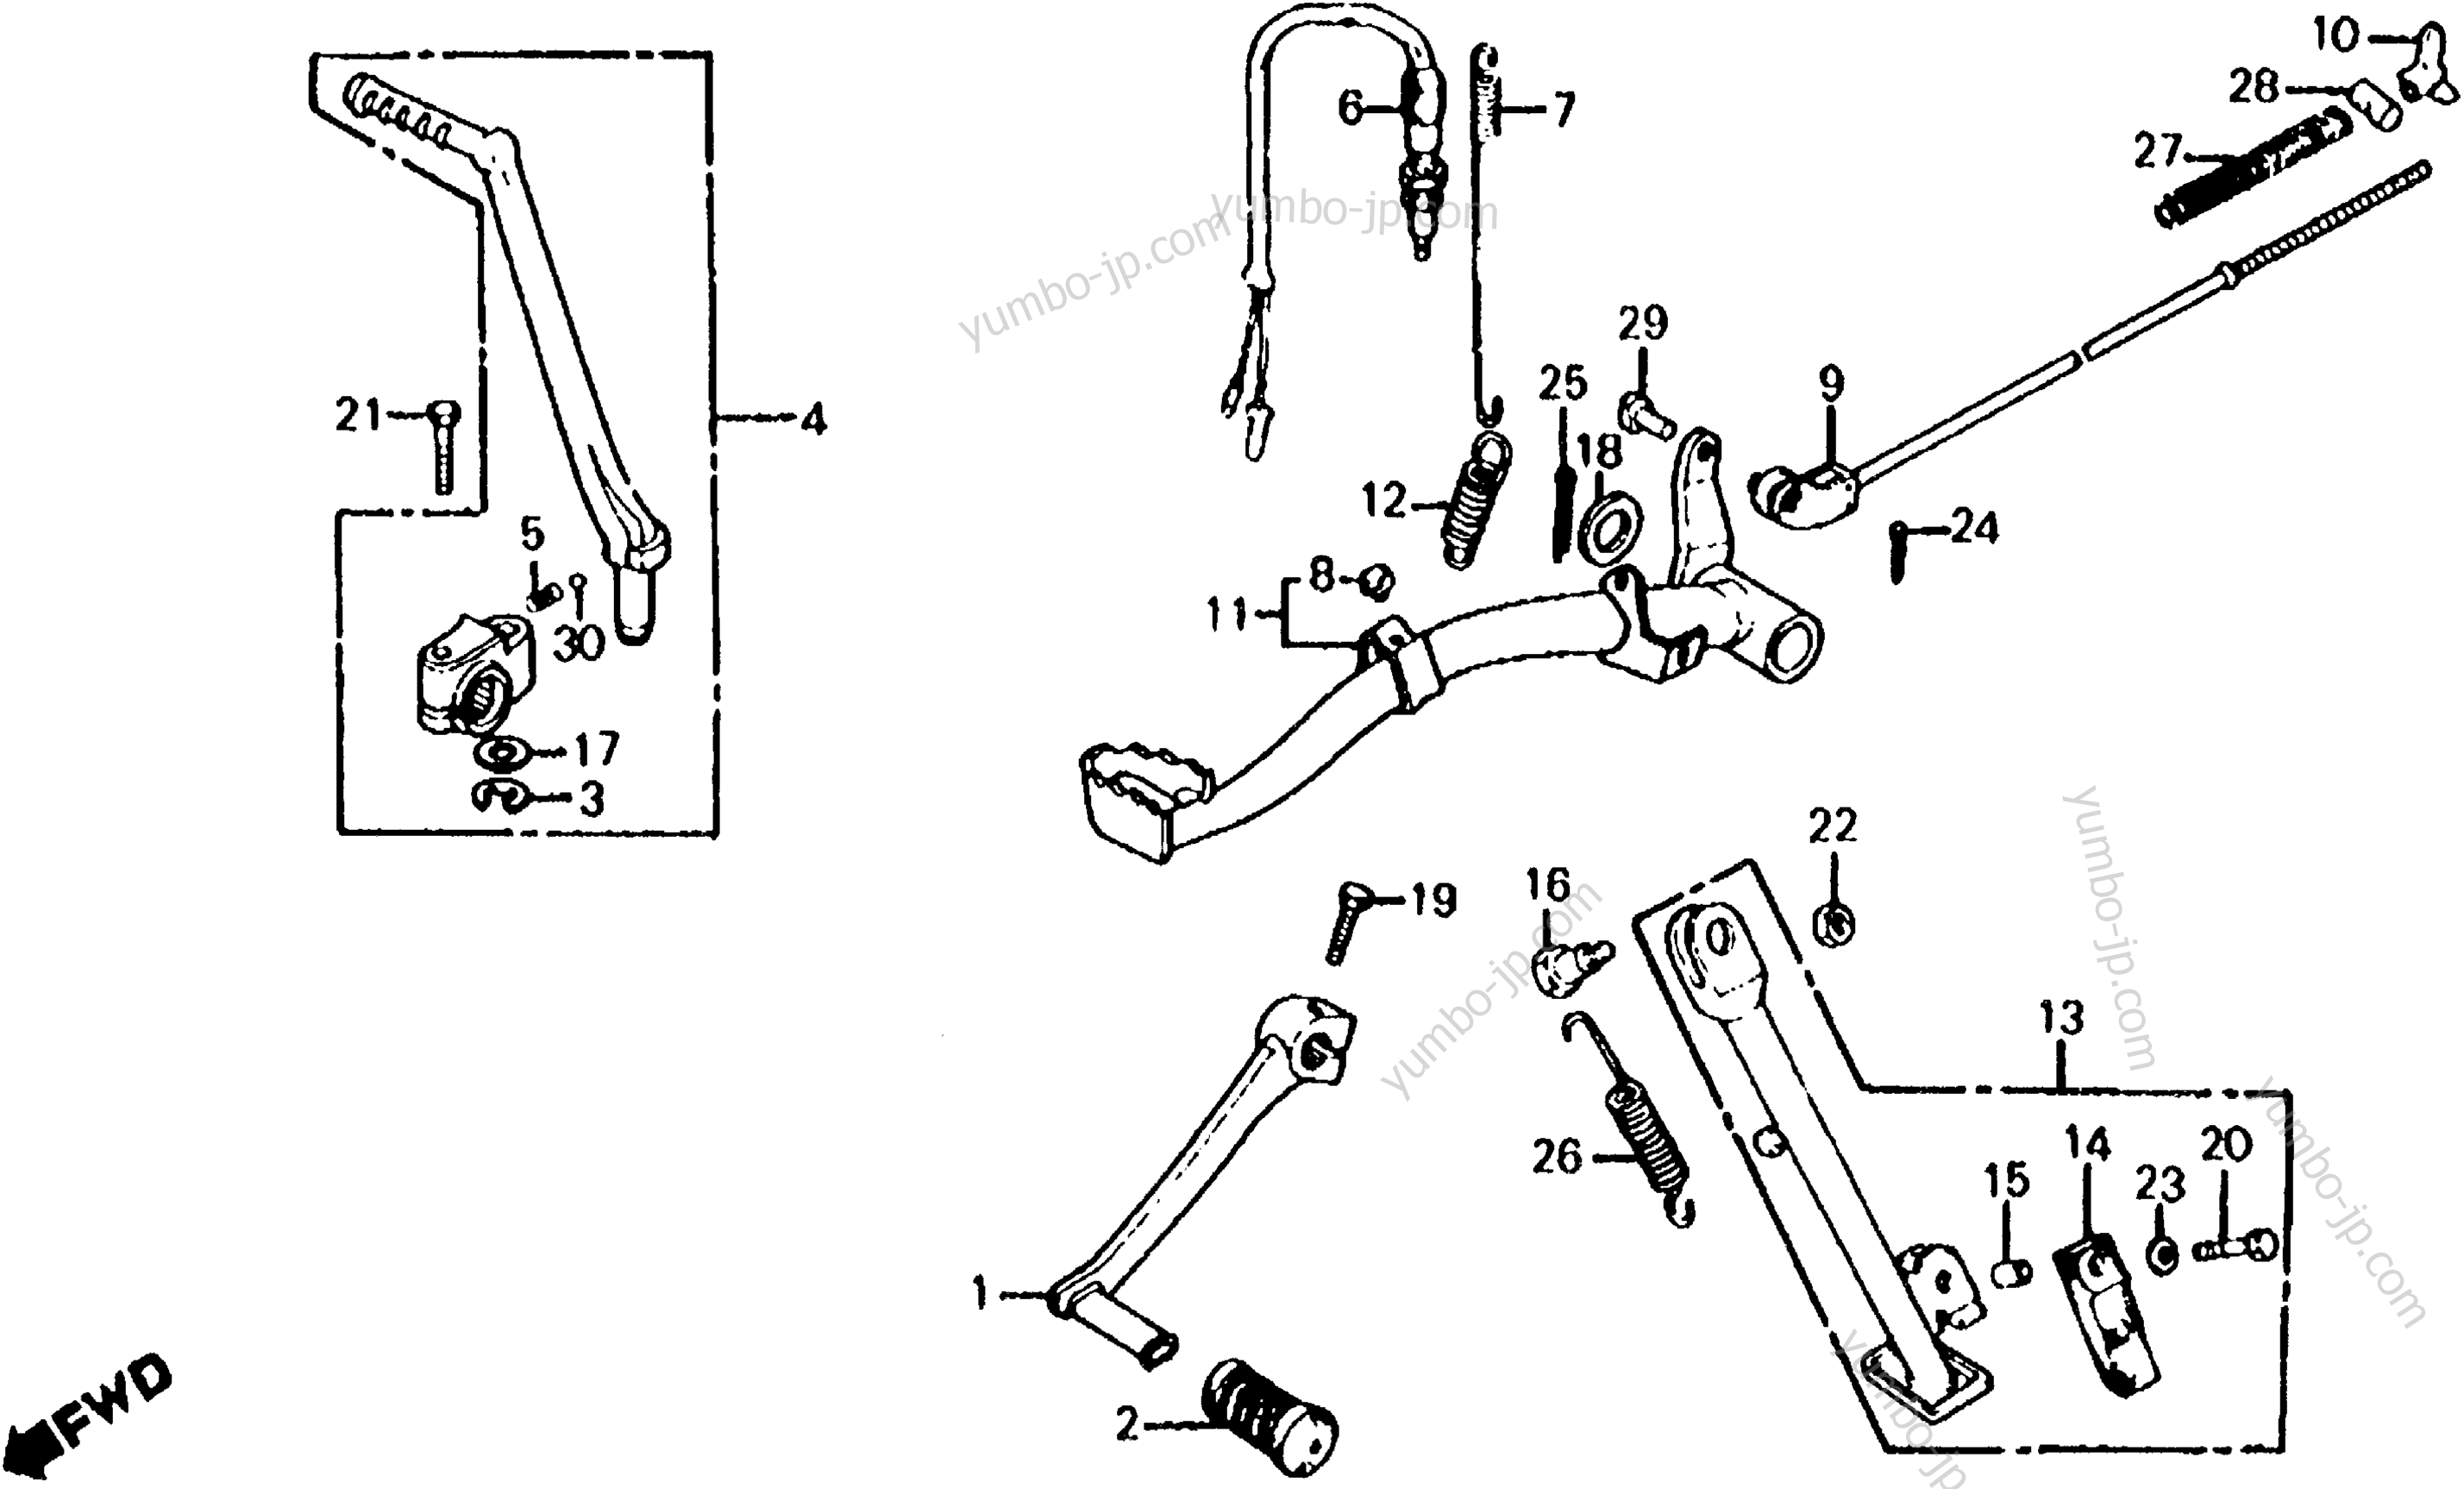 BRAKE PEDAL / GEARSHIFT PEDAL / KICK STARTER ARM for motorcycles HONDA XL100S A 1984 year